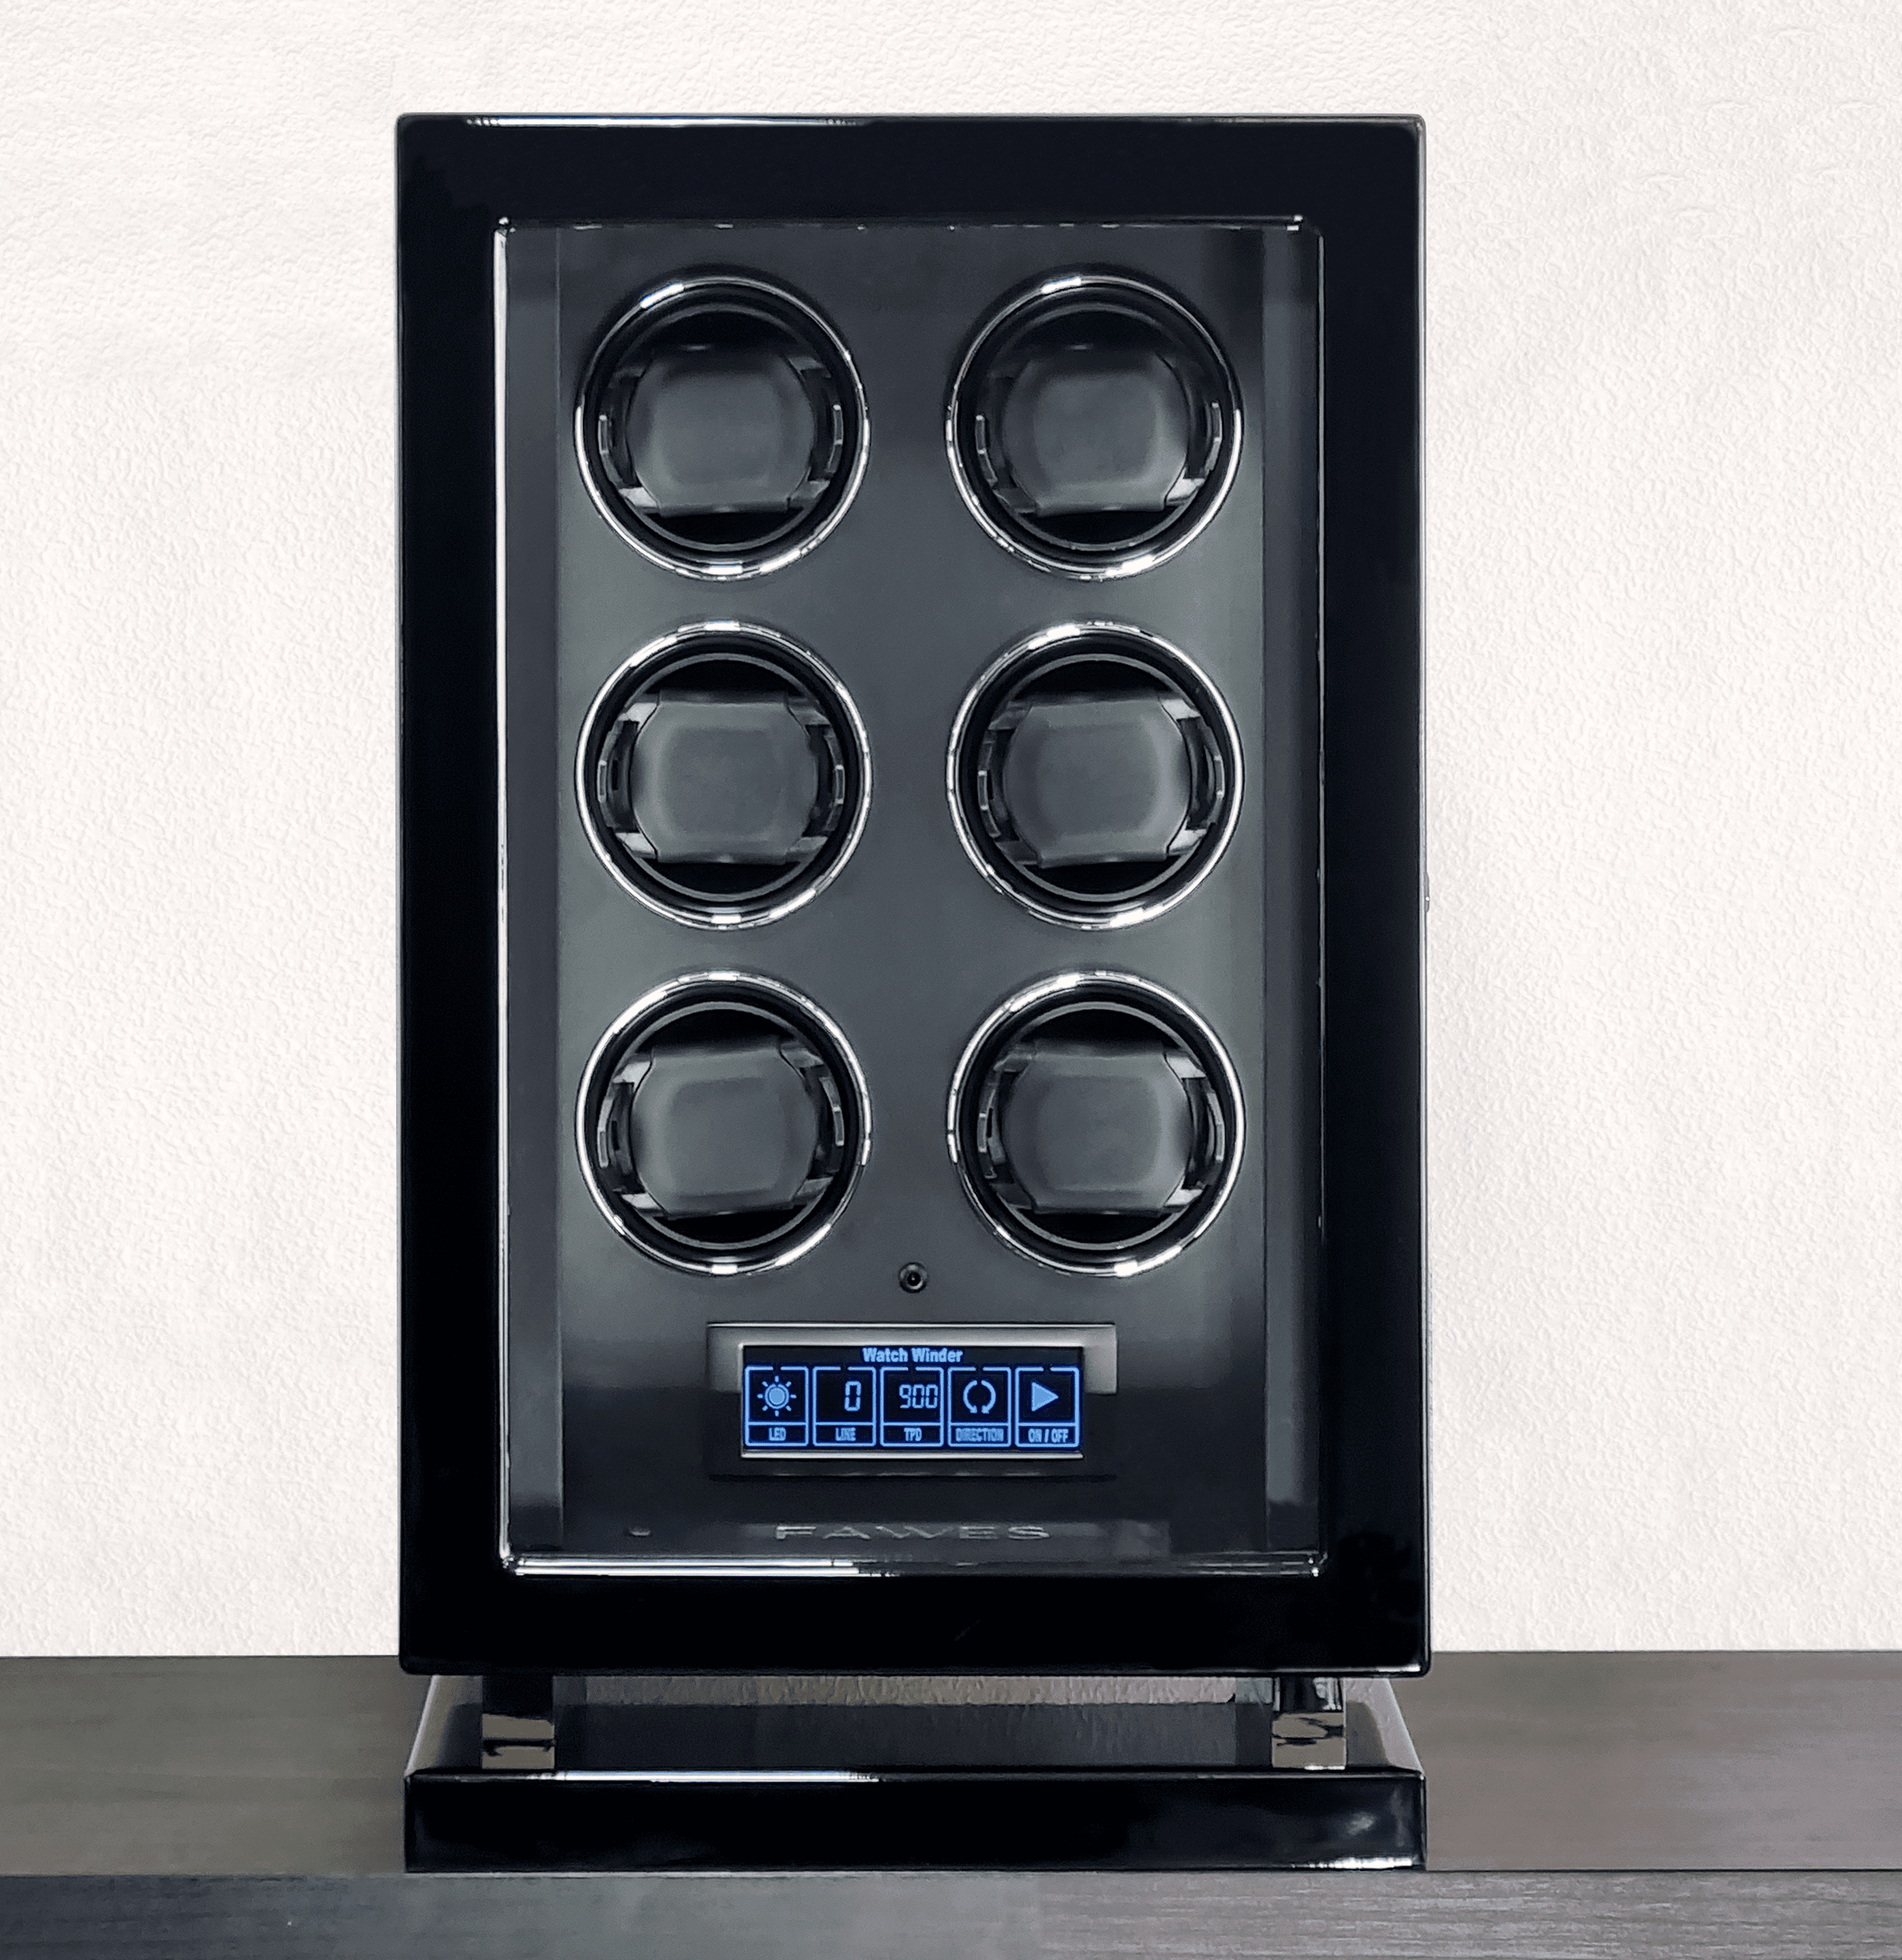 X63 Watch Winder with Biometric Access - 6 Epitope